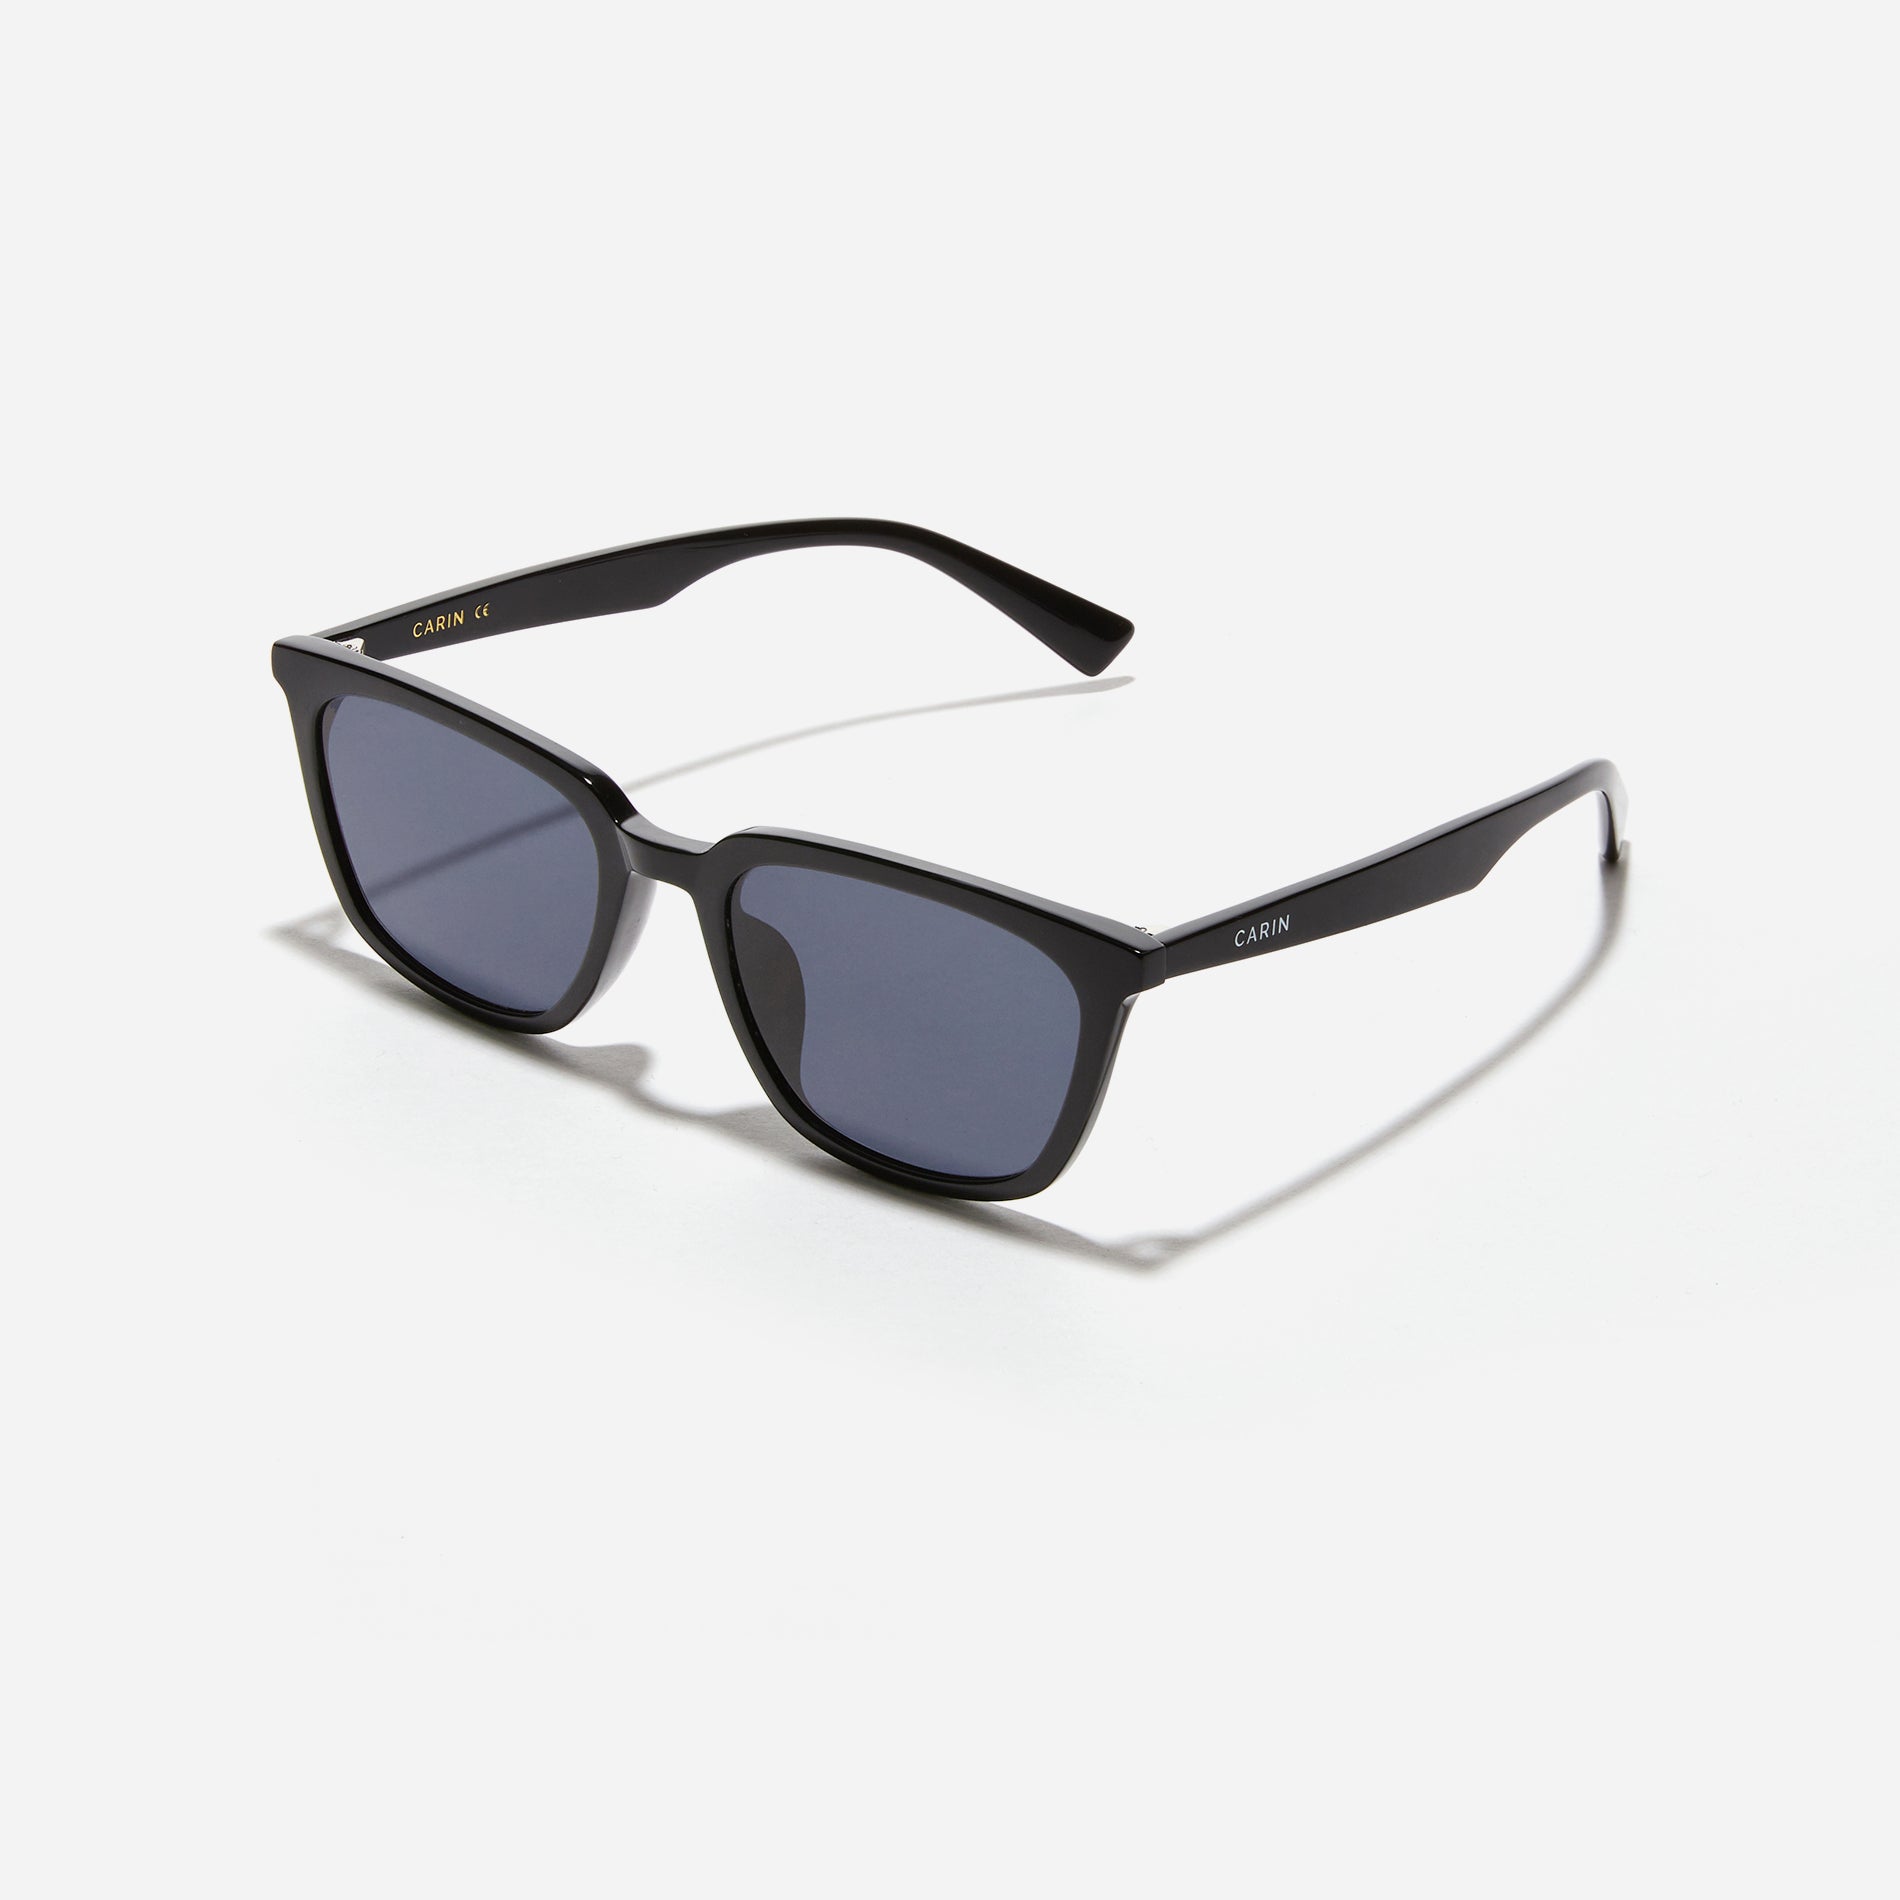 Square-shaped petite frame sunglasses. They feature a sleek, narrow, retro-inspired design from the 80s, reinterpreted with a modern touch. The distinctive narrow rim shape exudes a chic and contemporary vibe. Additionally, soft color variations effortlessly complement various face shapes,